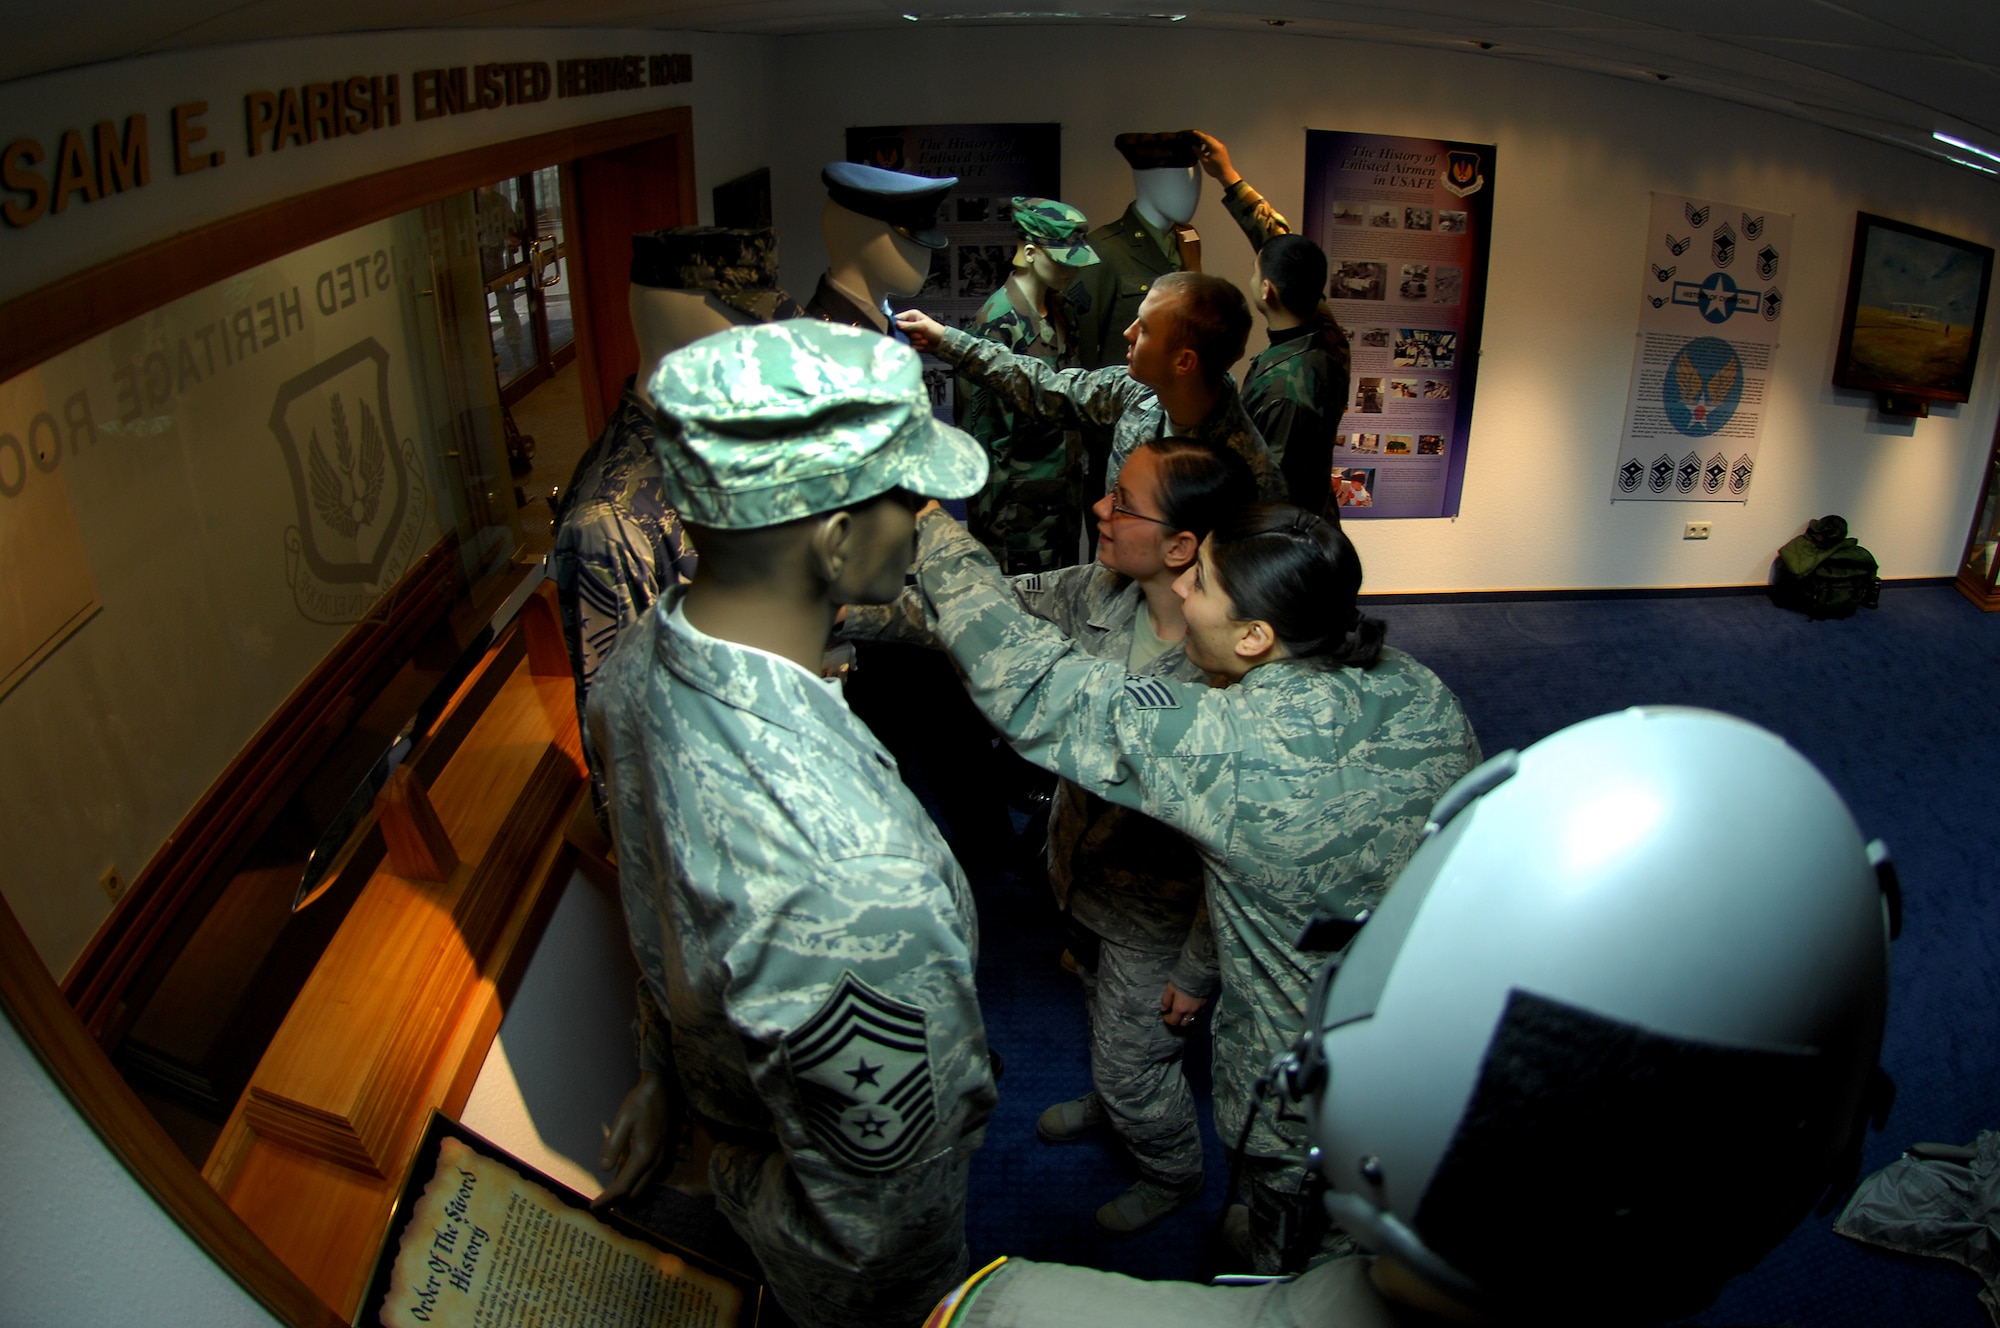 Air Force members take a tour of the Ramstein Air Base Enlisted Heritage Hall Jan. 6, 2009. The hall displays an array of different Air Force enlisted artifacts. (U.S. Air Force photo by Airman 1st Class Kenny Holston)